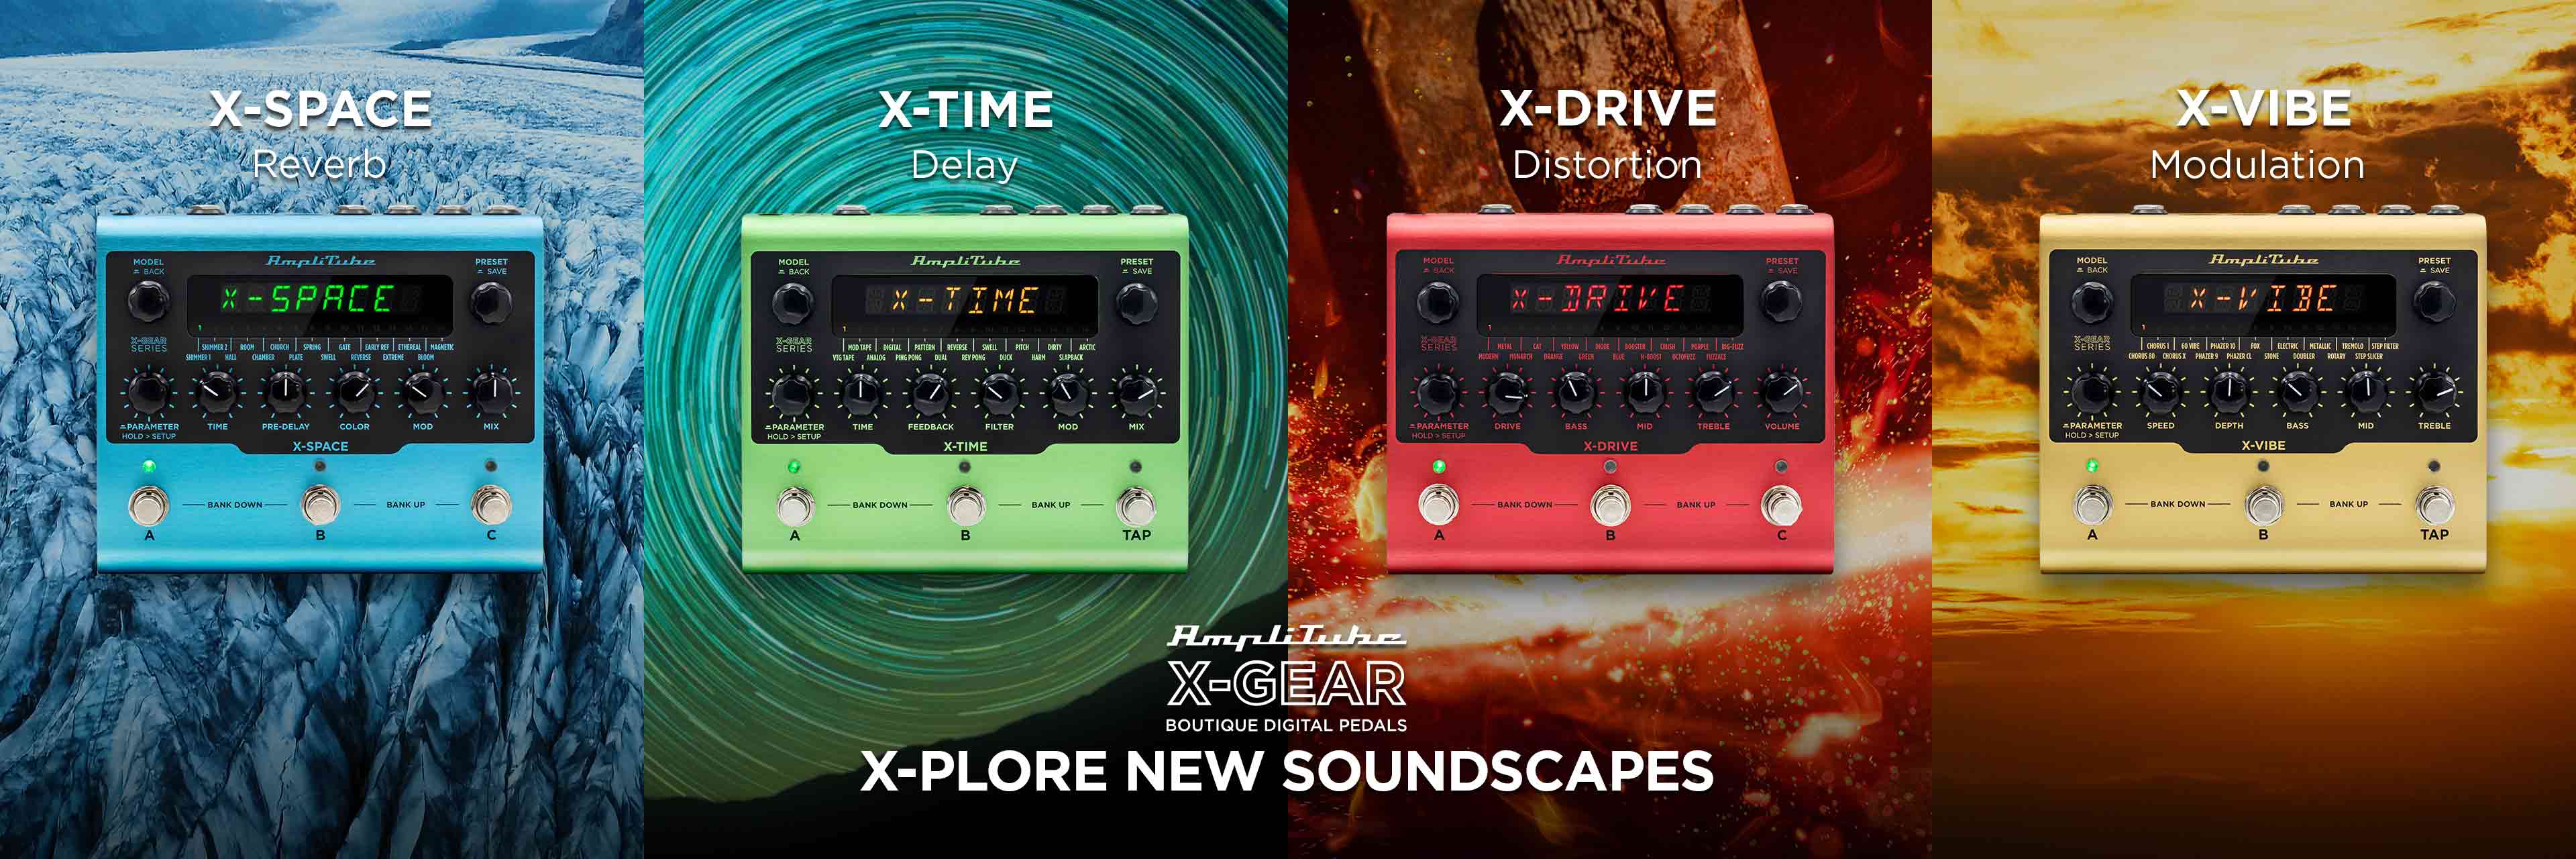 IK Multimedia AmpliTube X-Drive distortion pedal plugin, FREE download for  a limited time